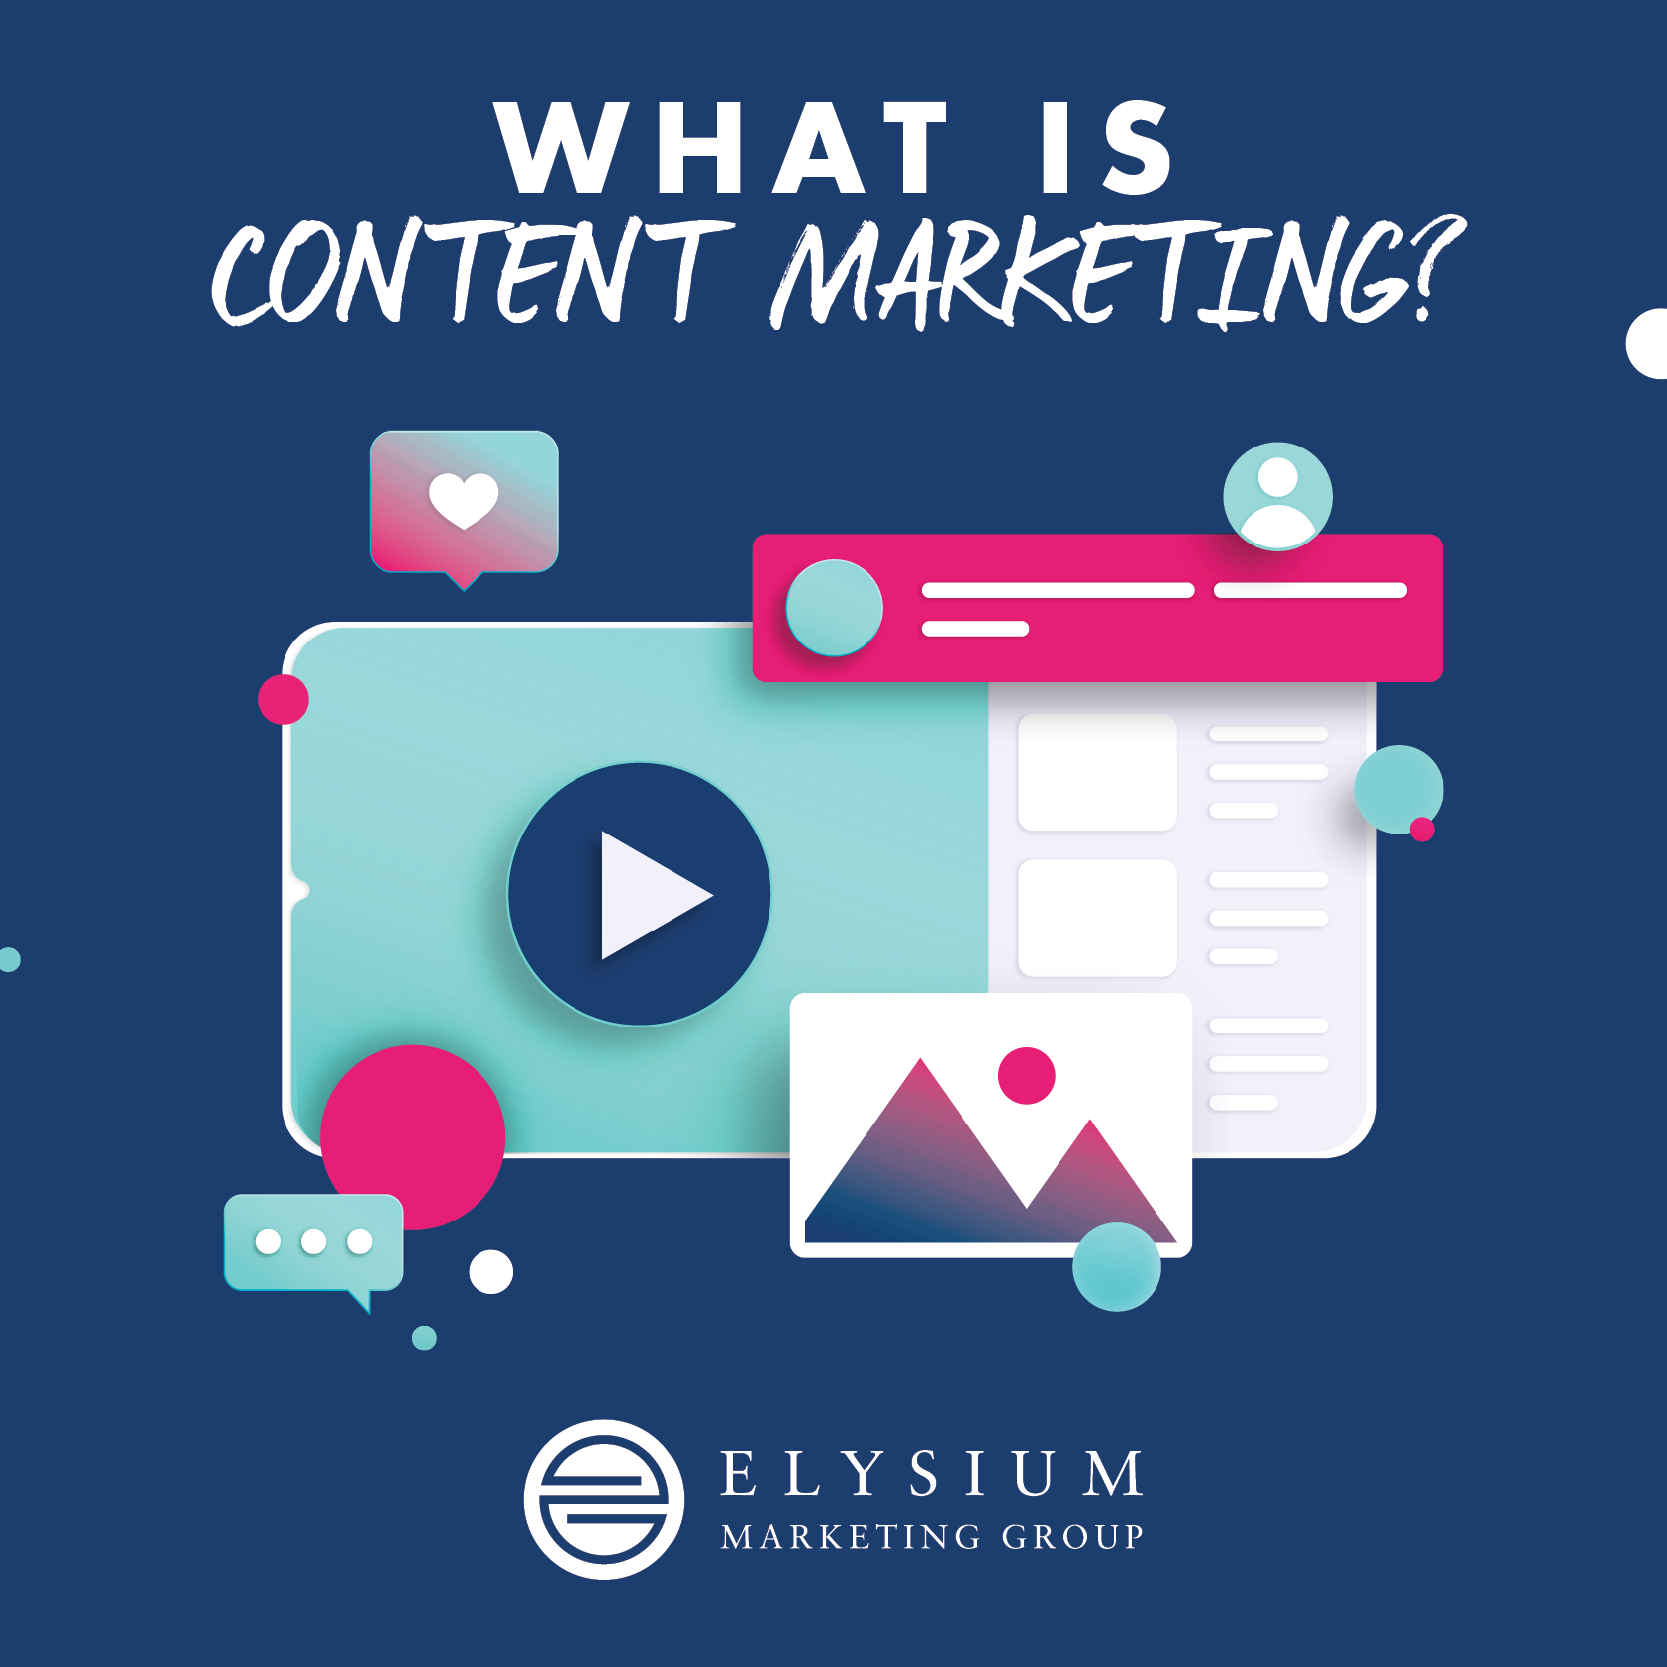 What is Content Marketing by Elysium MG